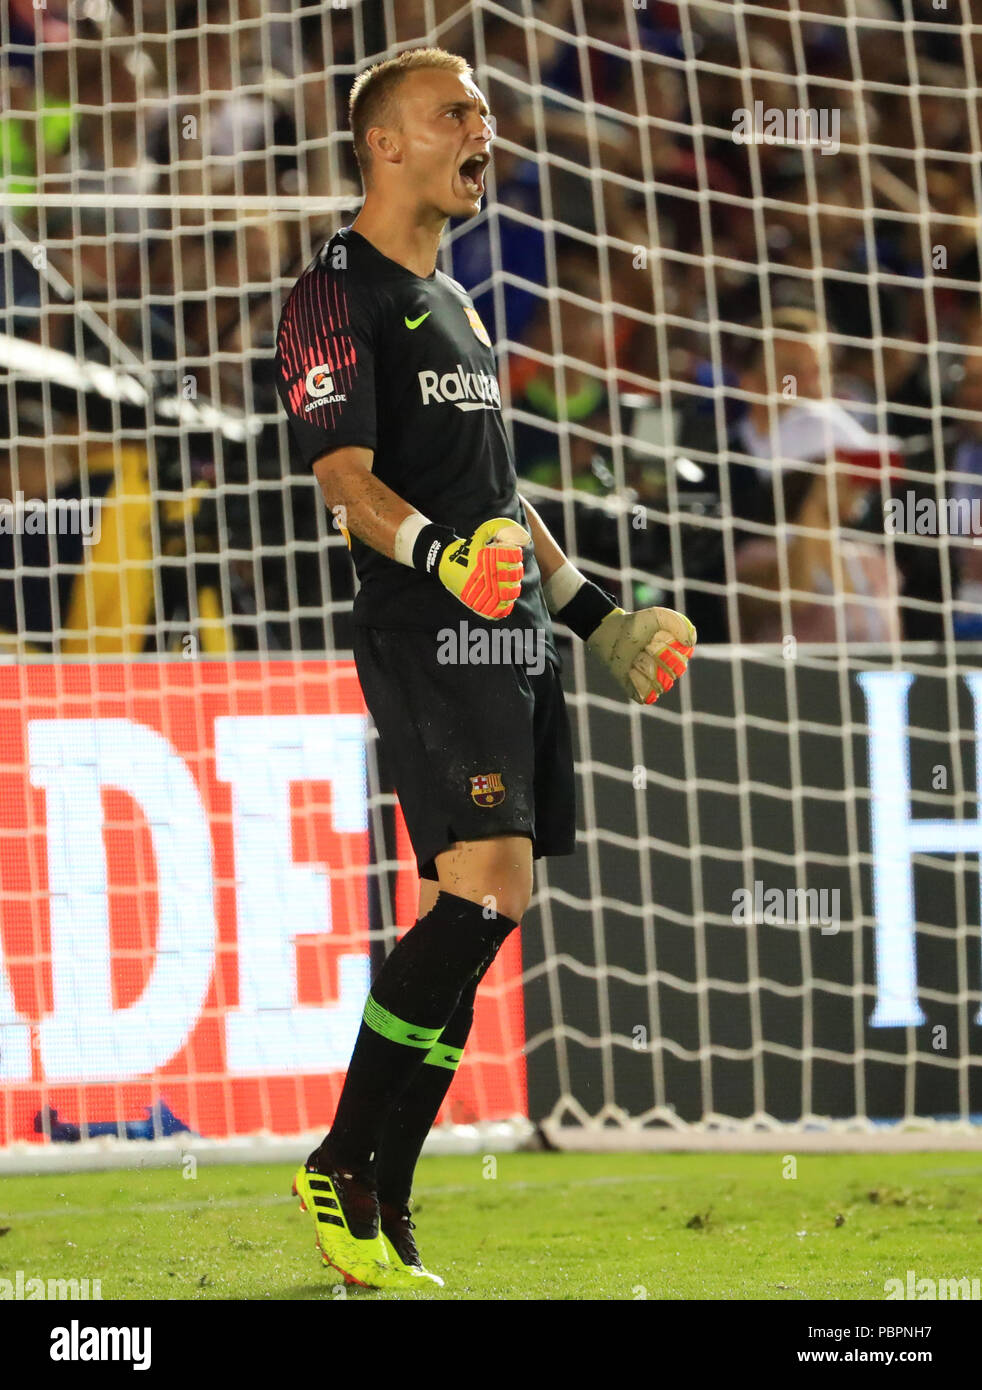 Pasadena, USA. 28th July, 2018. Barcelona's goalkeeper Jasper Cillessen celebrates during the International Champions Cup soccer match between Barcelona and Tottenham Hotspur in Pasadena, the United States, July 28, 2018. Barcelona won 7-5 (5-3 in penalty shootout). Credit: Li Ying/Xinhua/Alamy Live News Stock Photo